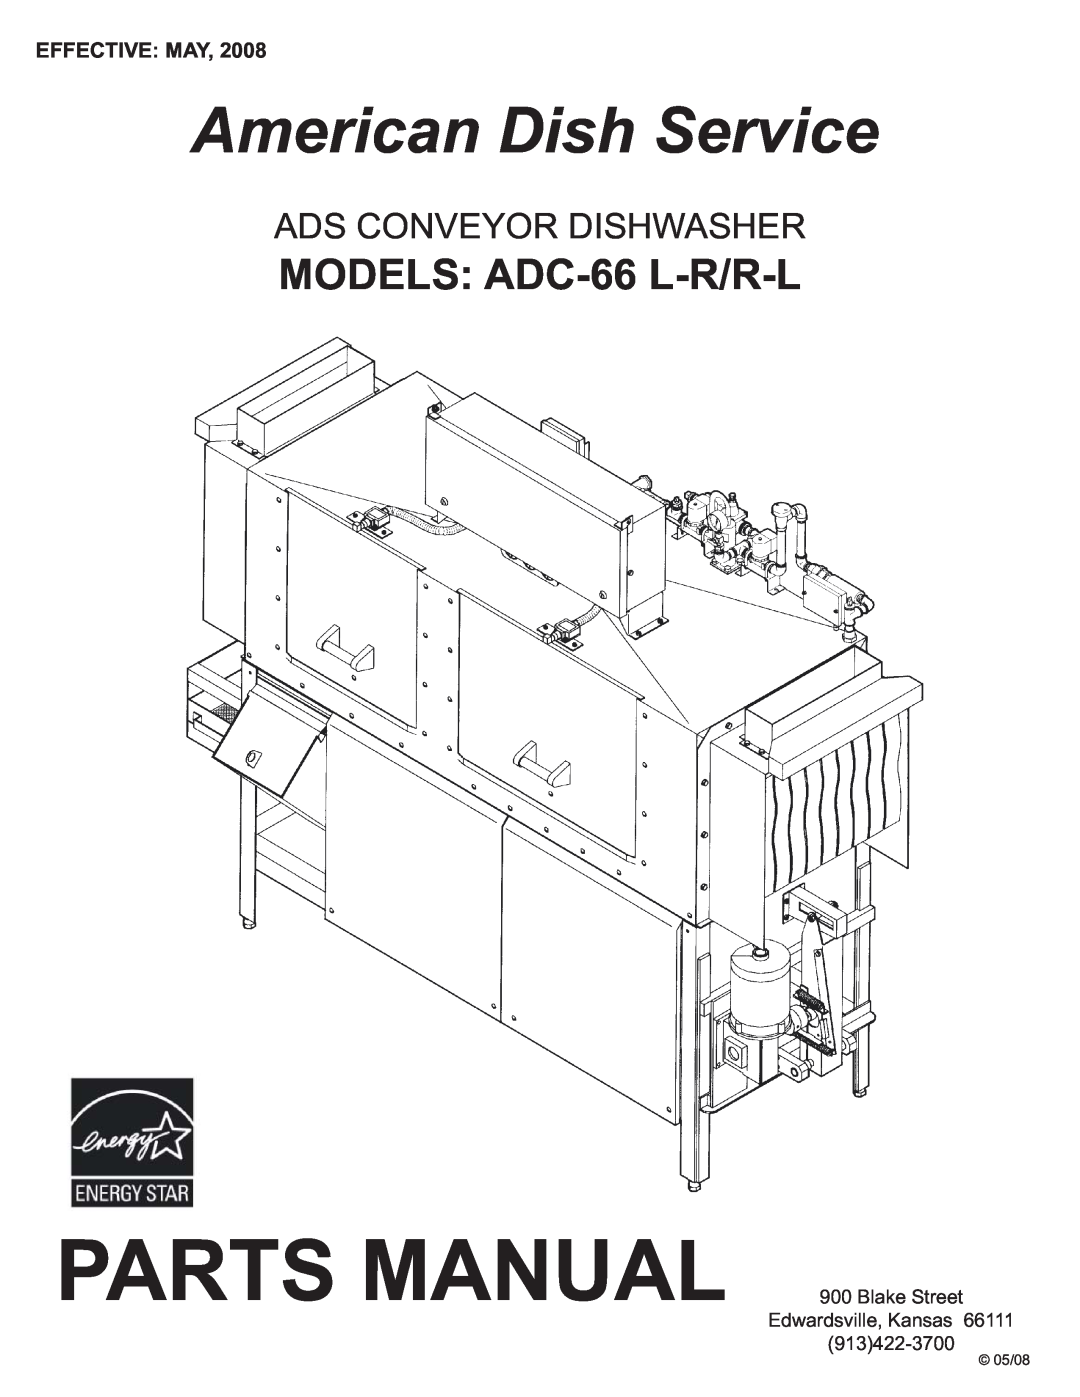 American Dish Service ADC-66 L-R/R-L manual Ads Conveyor Dishwasher, Effective: May, Parts Manual, American Dish Service 